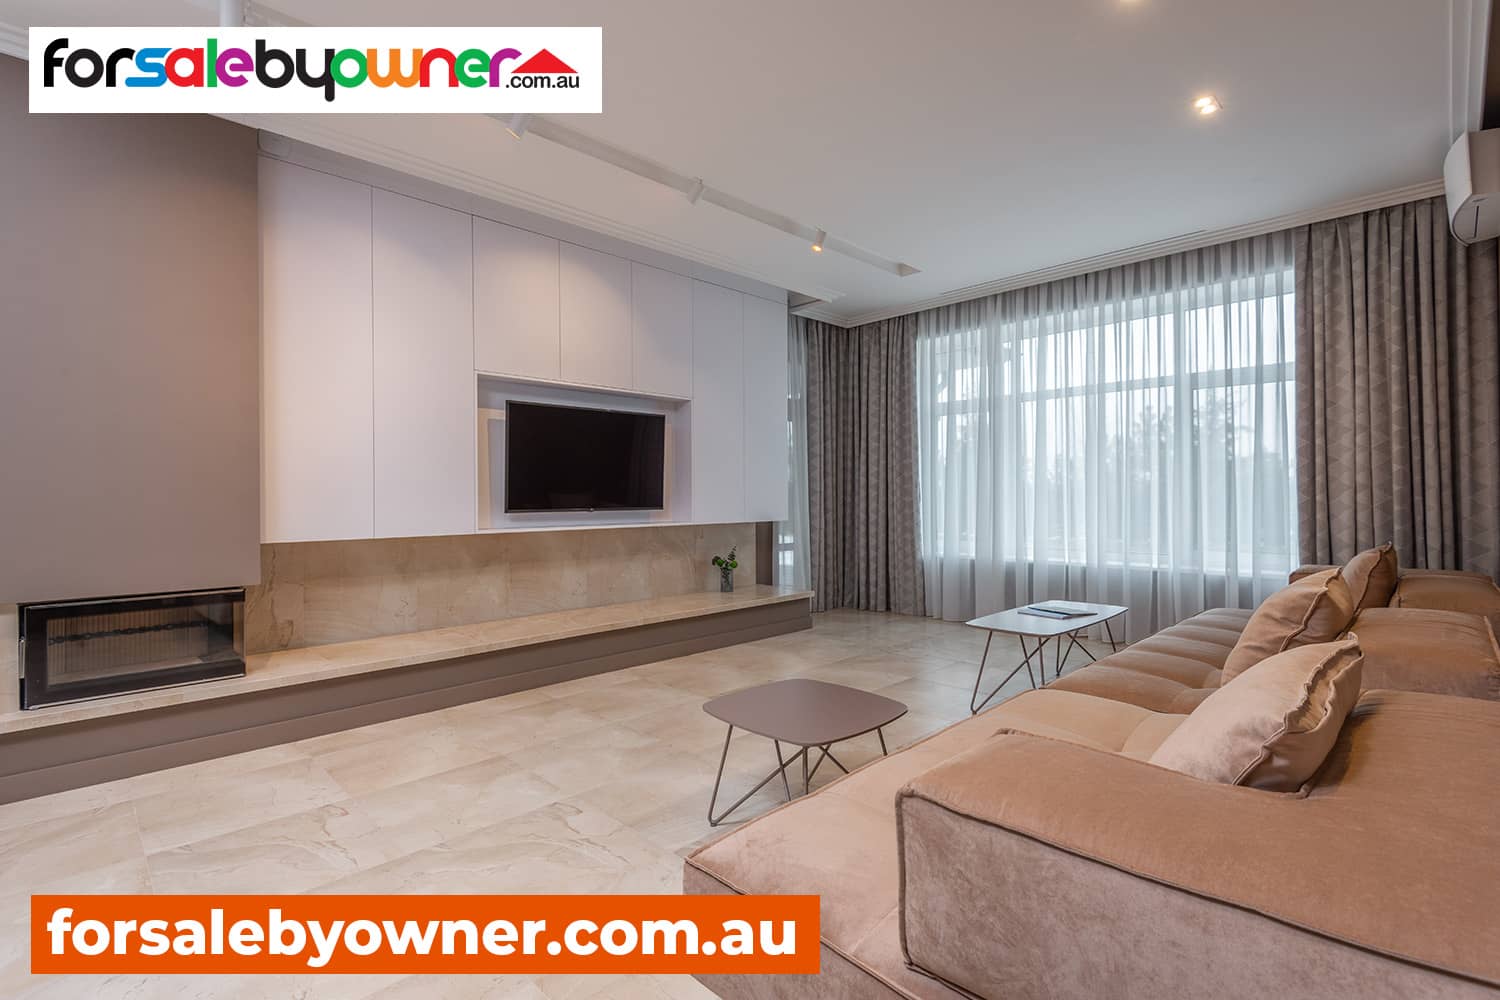 For Sale By Owner SA | Sell My House South Australia